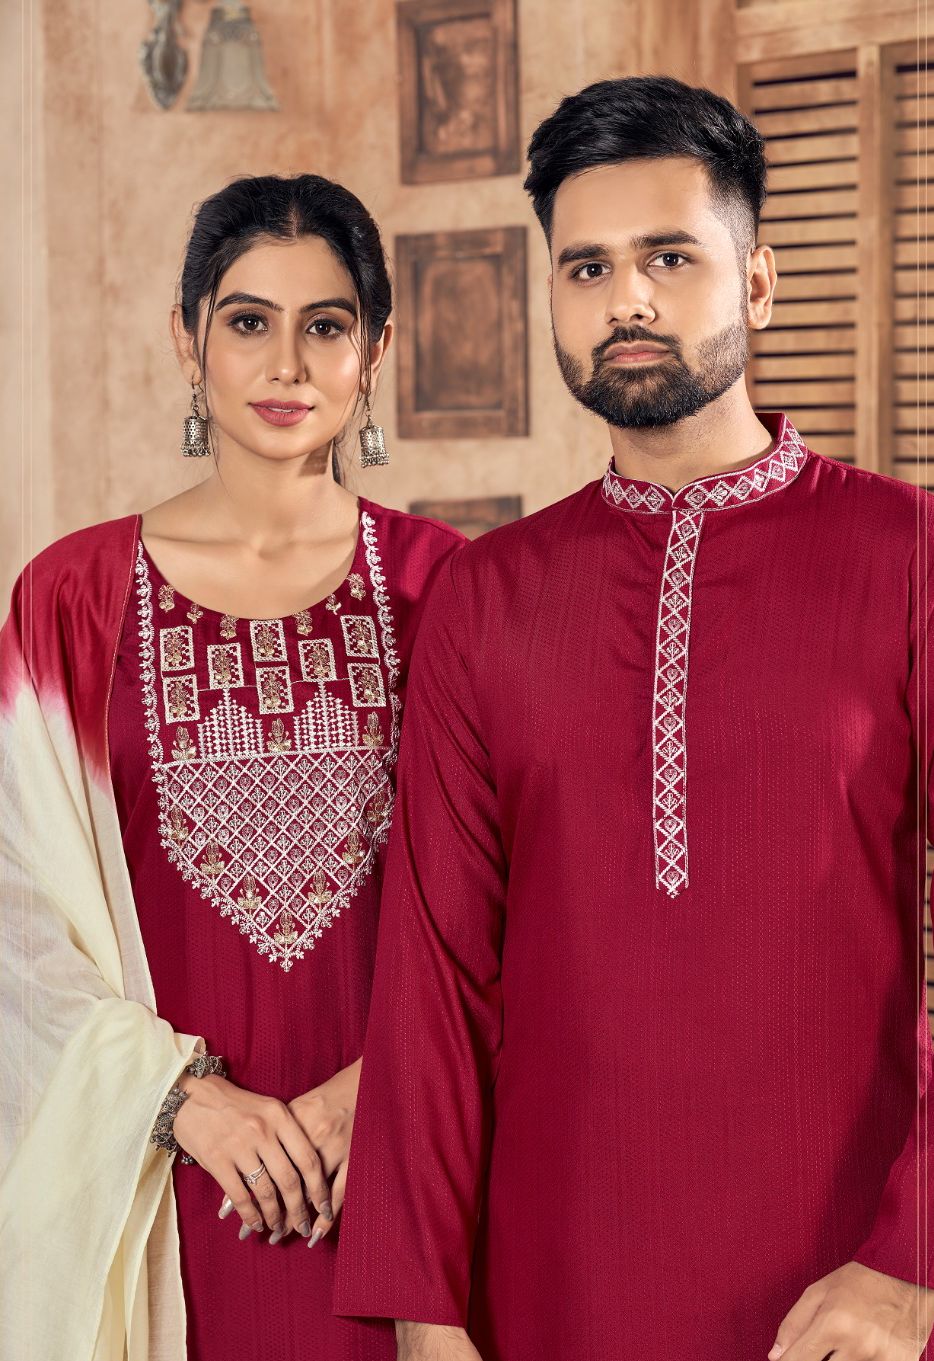 Buy Couple Kurtis online from PS Trends